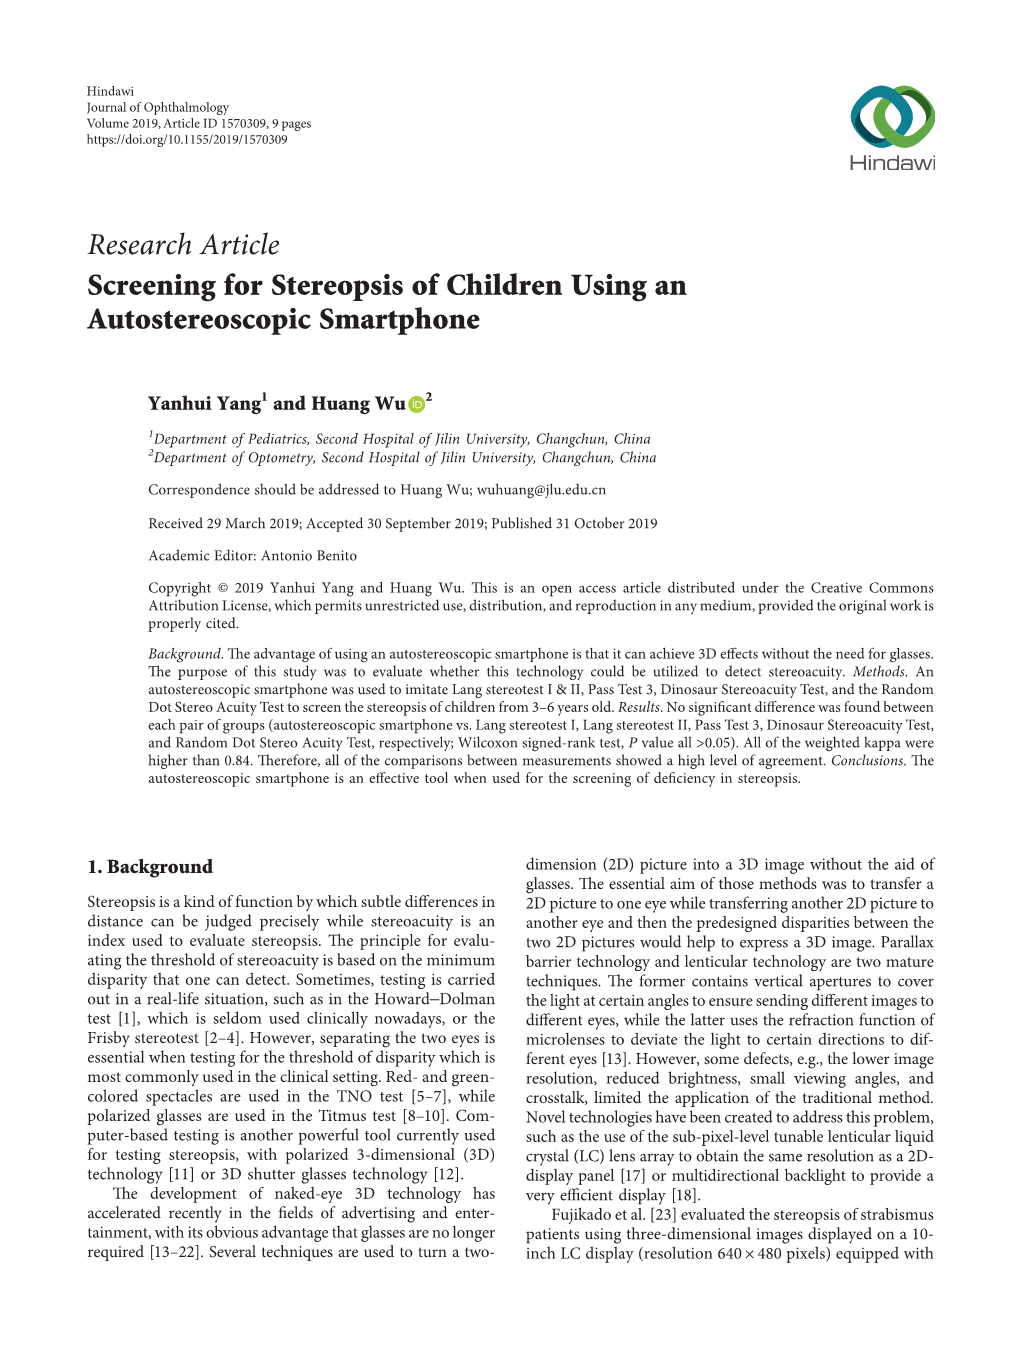 Screening for Stereopsis of Children Using an Autostereoscopic Smartphone